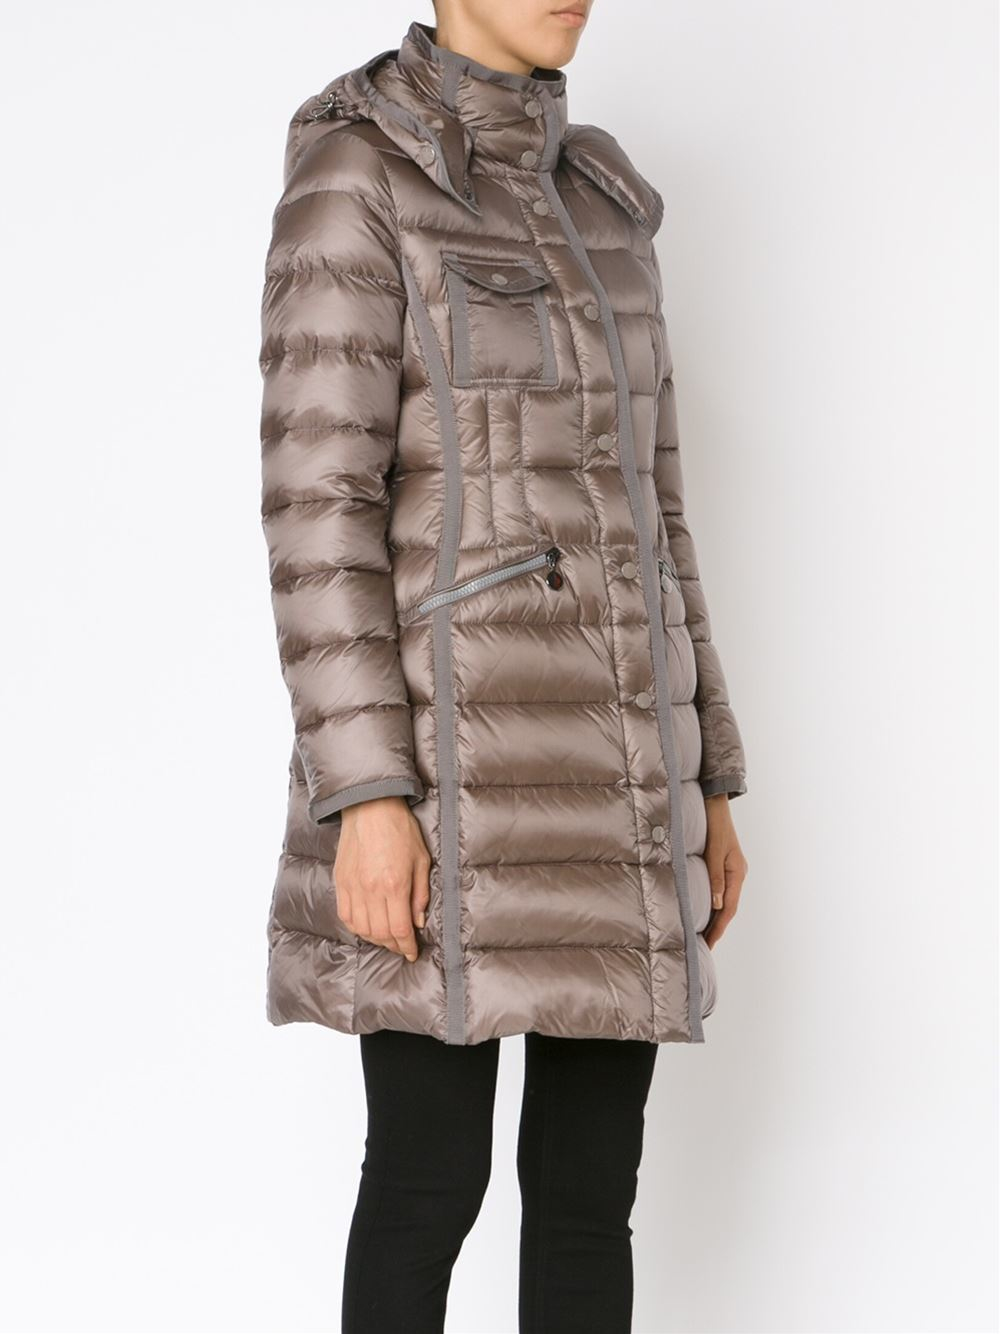 Moncler 'hermine' Padded Coat in Grey (Gray) - Lyst